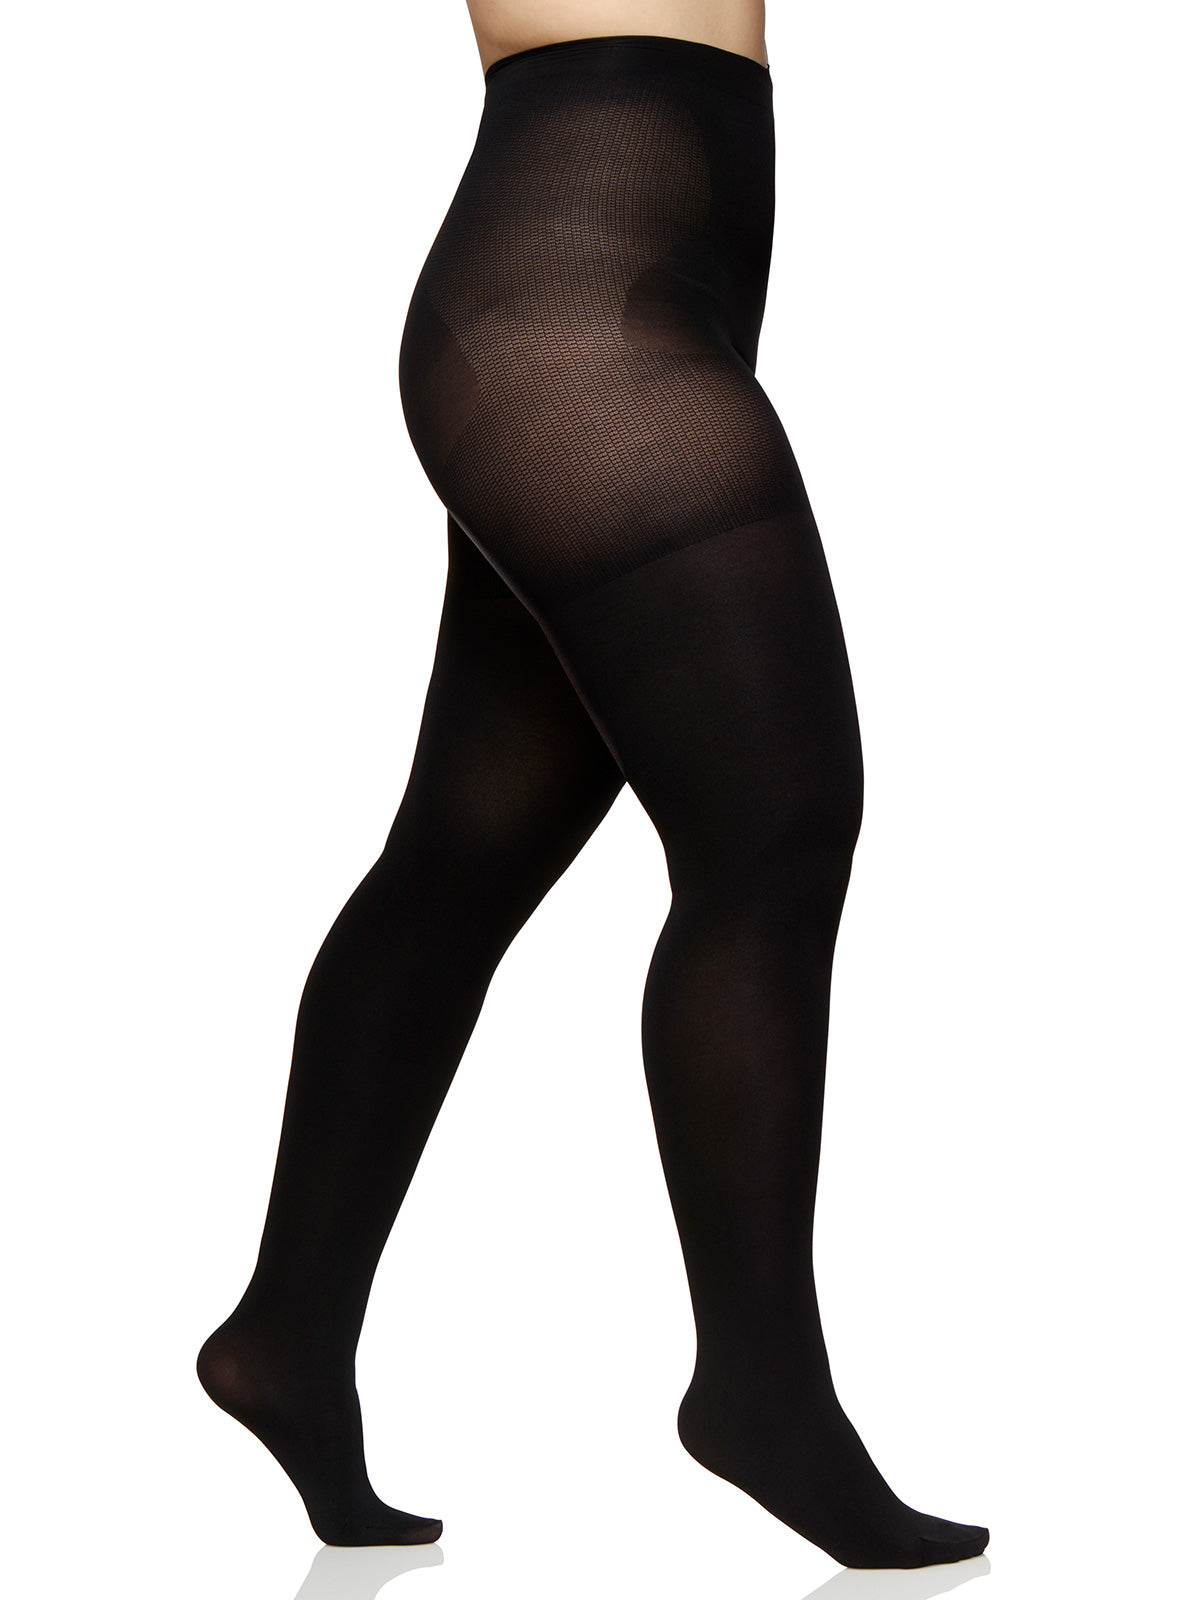 Berkshire Women's Plus Size Easy-On Maximum Coverage Tights